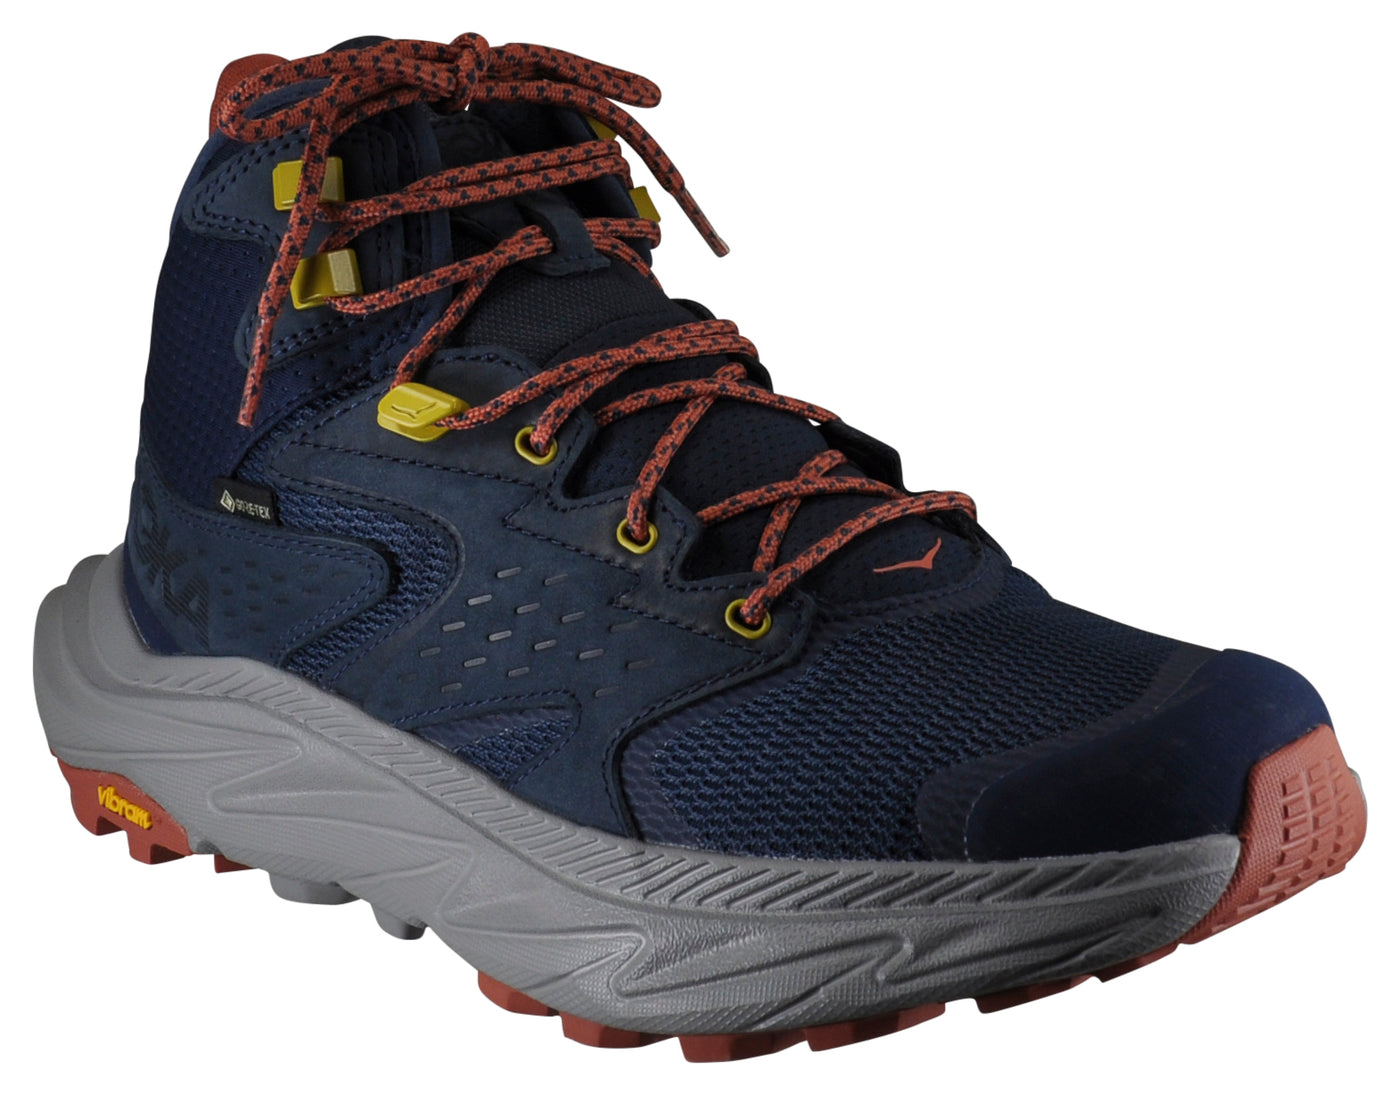 MEN'S ANACAPA 2 MID GTX OUTERSPACE/GREY